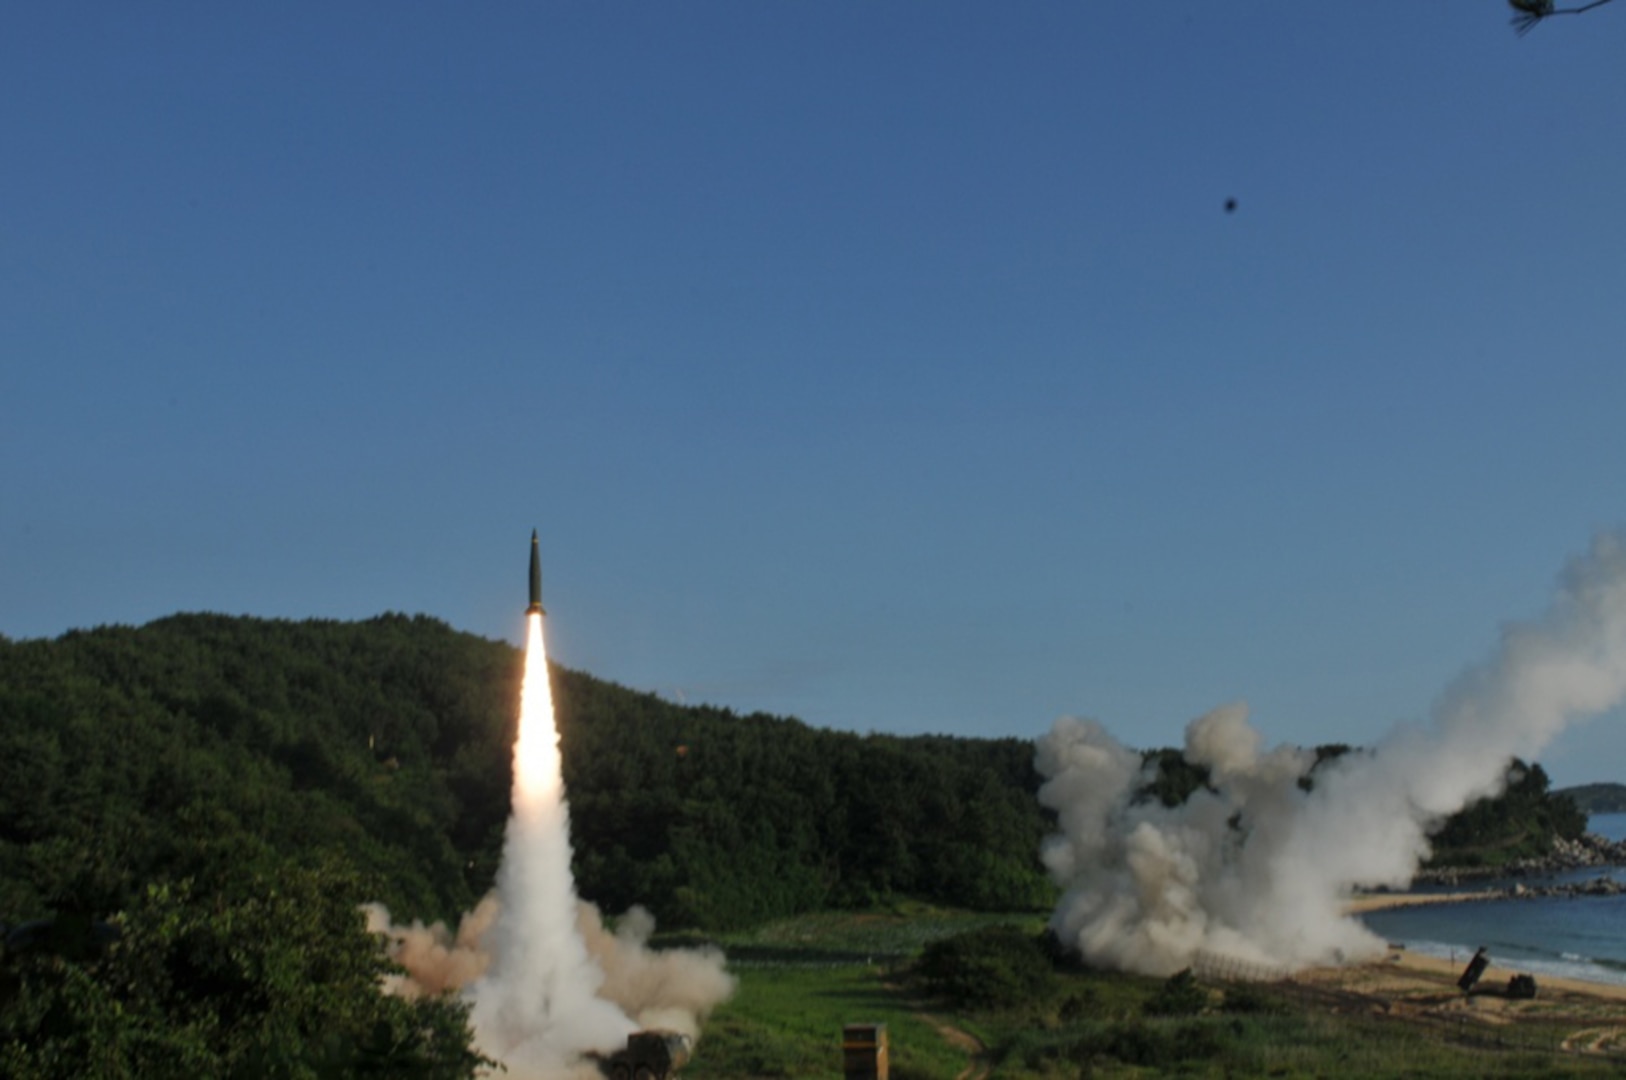 An M270 Multiple Launch Rocket System from 1st Battalion, 18th Field Artillery
 Regiment, 210th Field Artillery Brigade, 2nd Republic of Korea/United States Combined
 Division, fires an MGM-140 Army Tactical Missile into the East Sea, July 5. The missile
 launch demonstrated the combined deep strike capabilities which allow the ROK/U.S.
 Alliance to neutralize hostile threats and aggression against the ROK, U.S. and our
 Allies. 